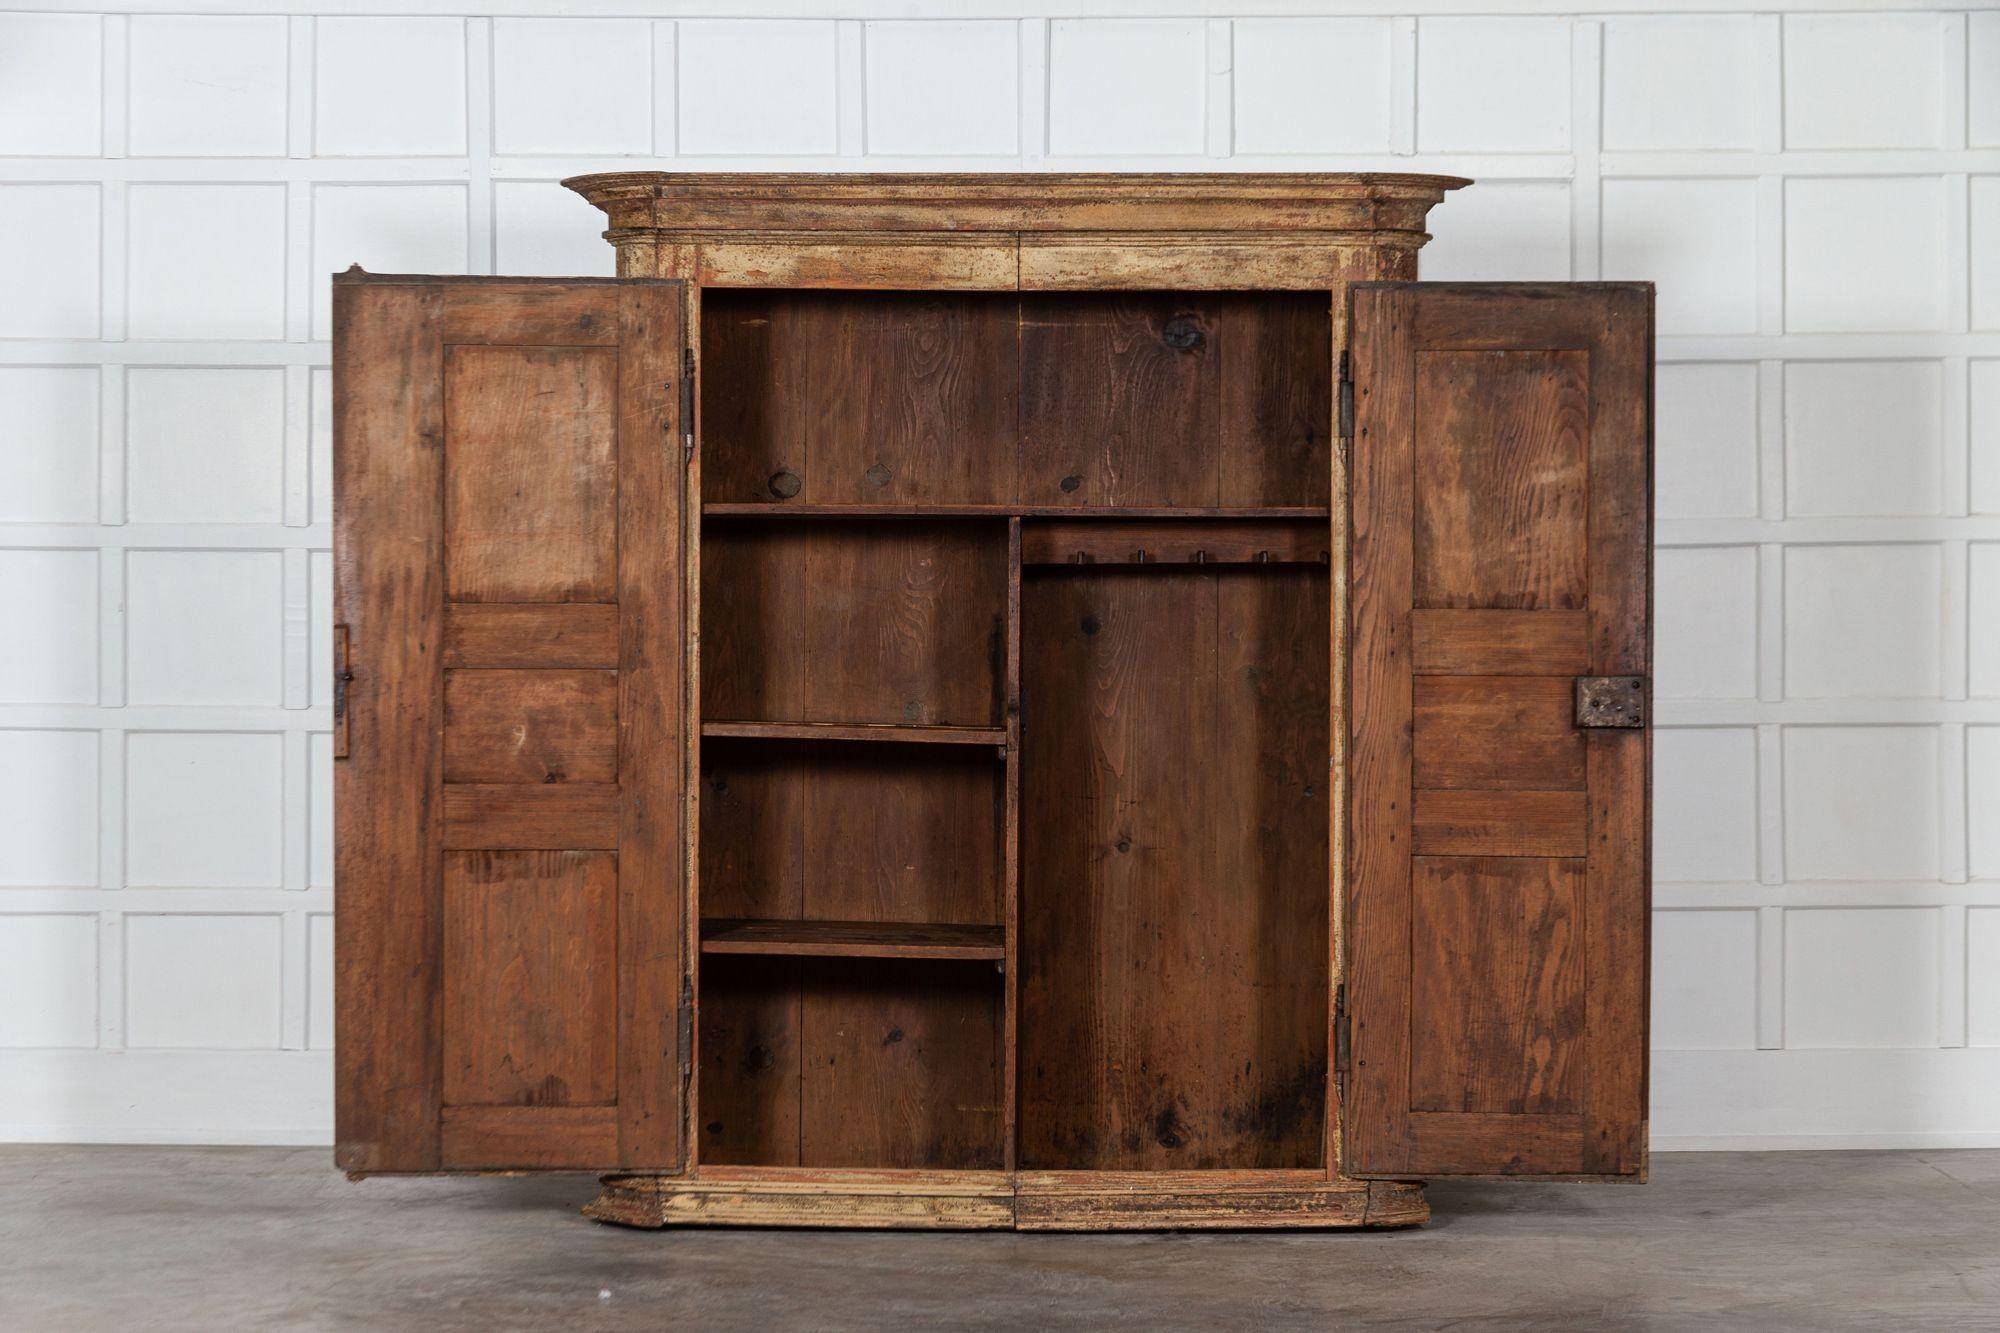 circa 1780
Large 18th century French painted pine armoire
sku 1405
Measures : W174 x D65 x H190 cm.